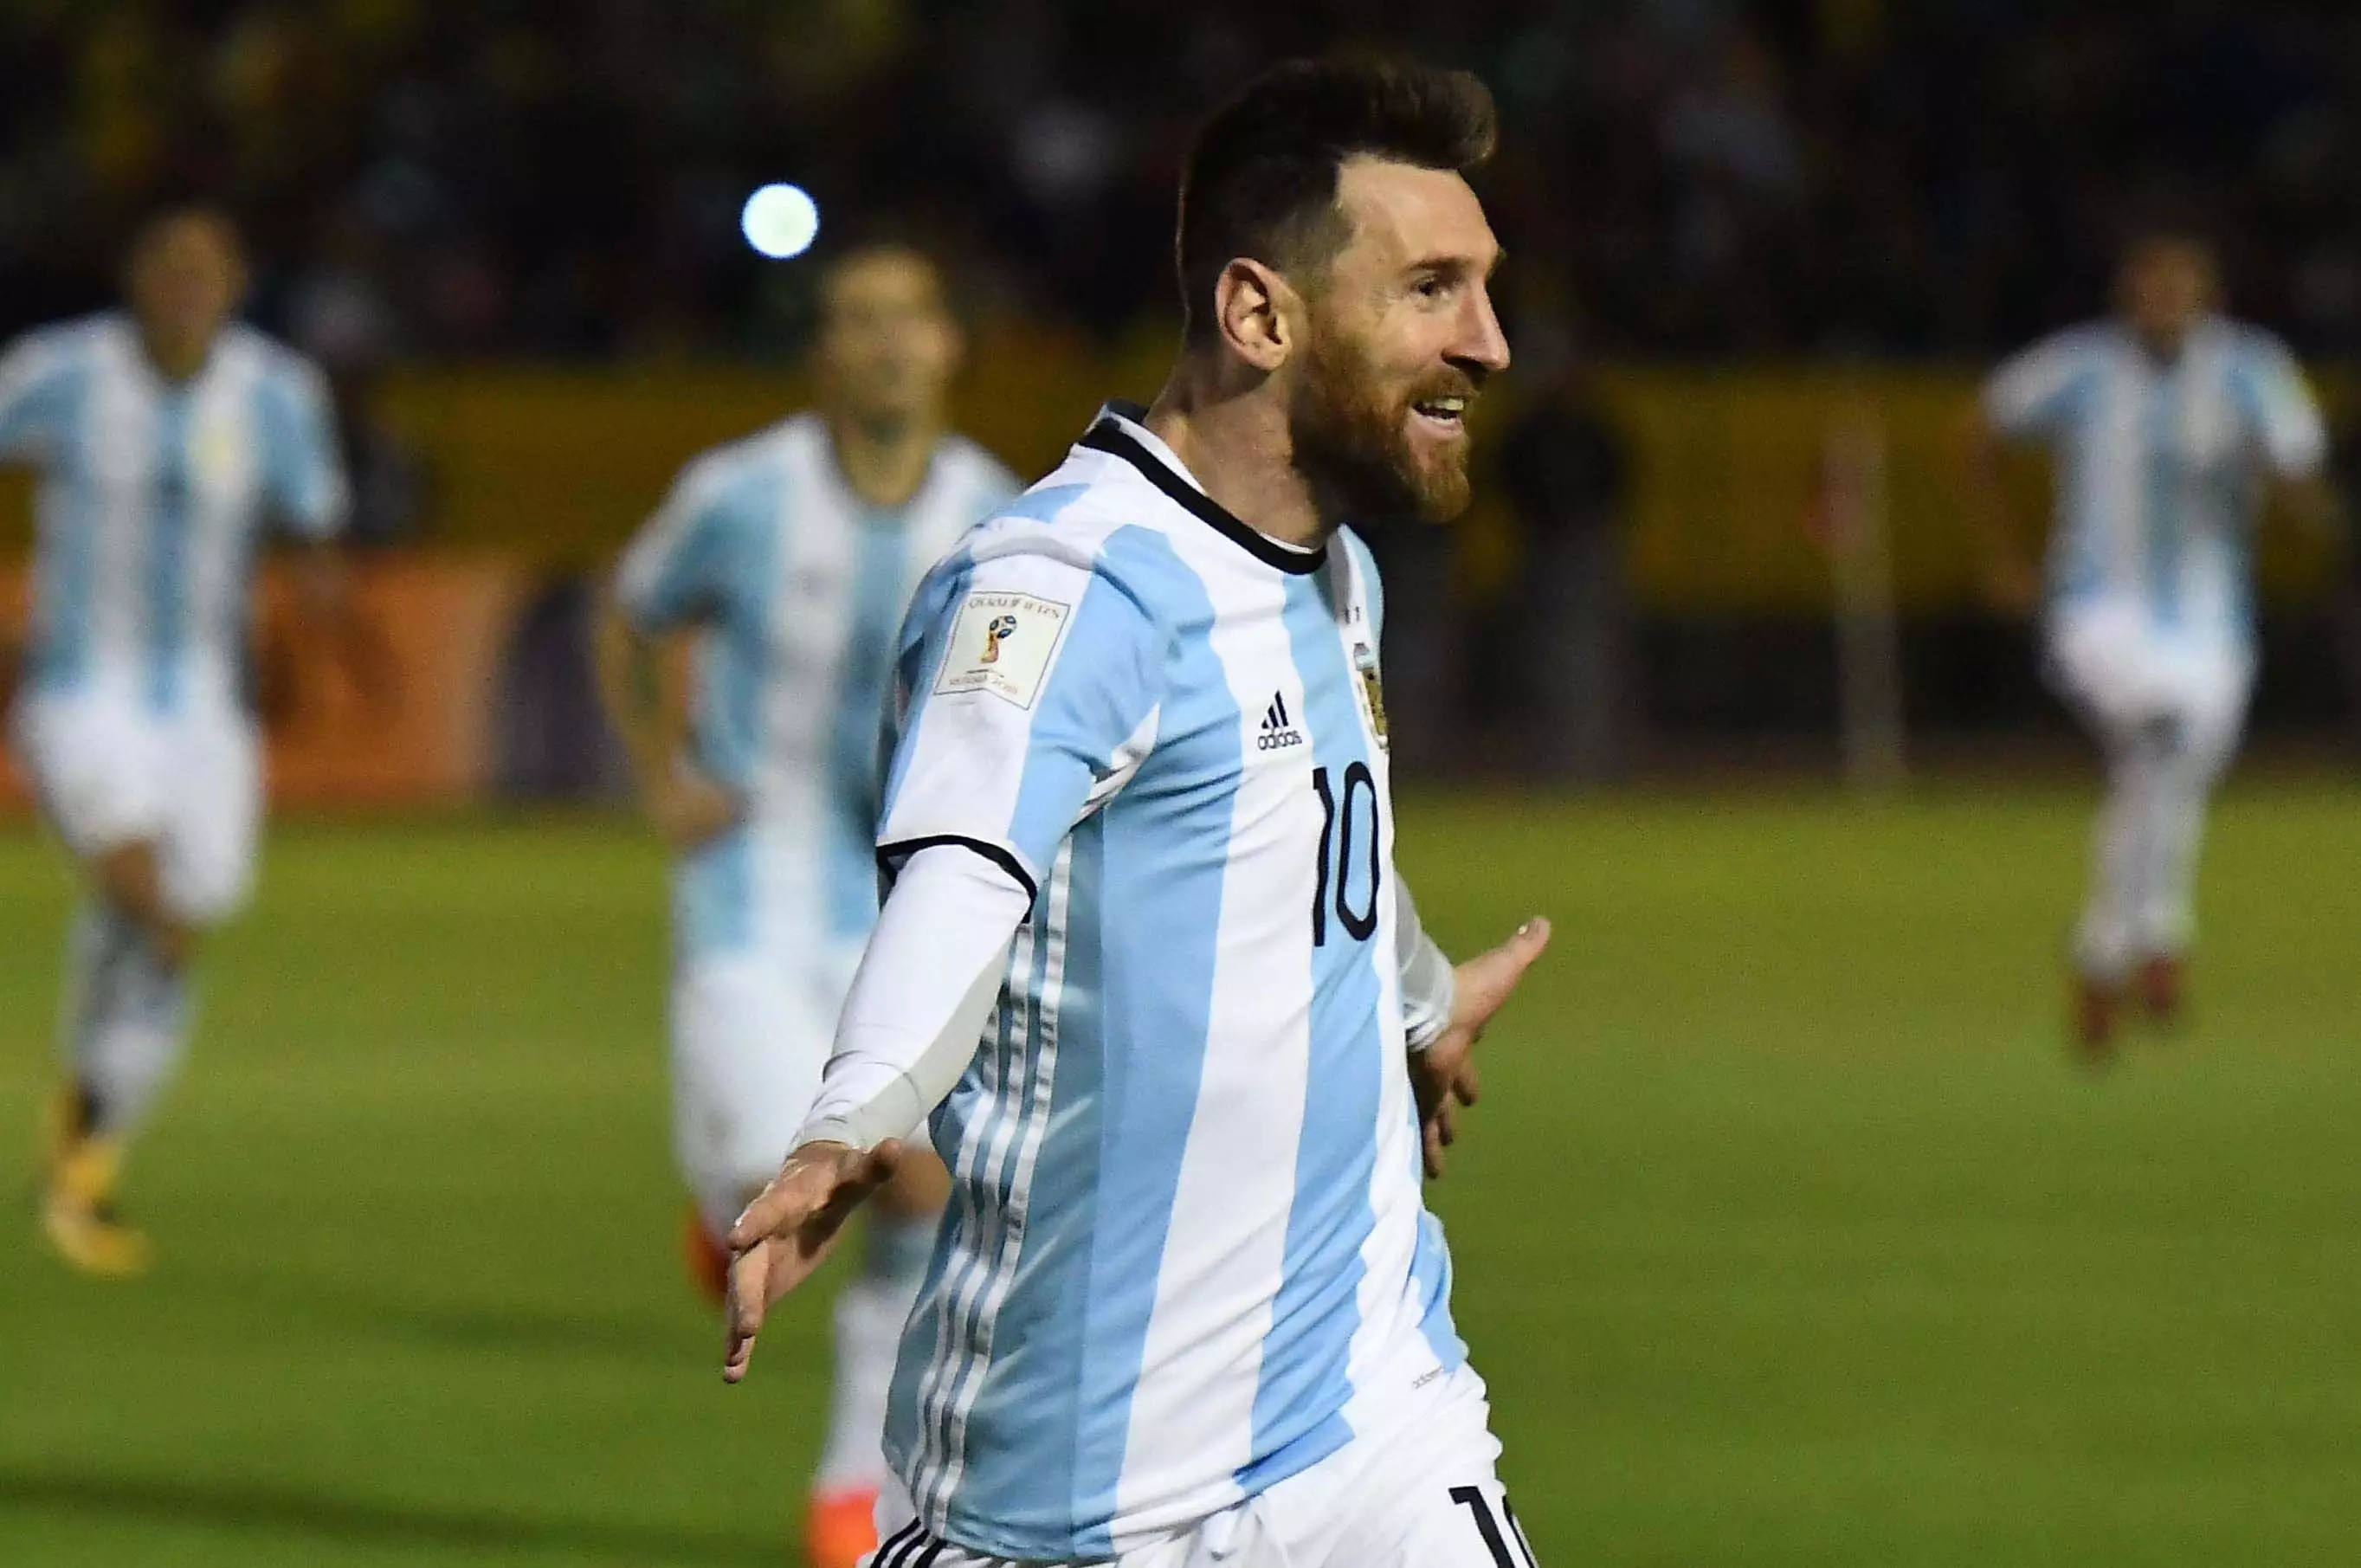 Does Messi need to win the World Cup to be considered the greatest? Image: PA